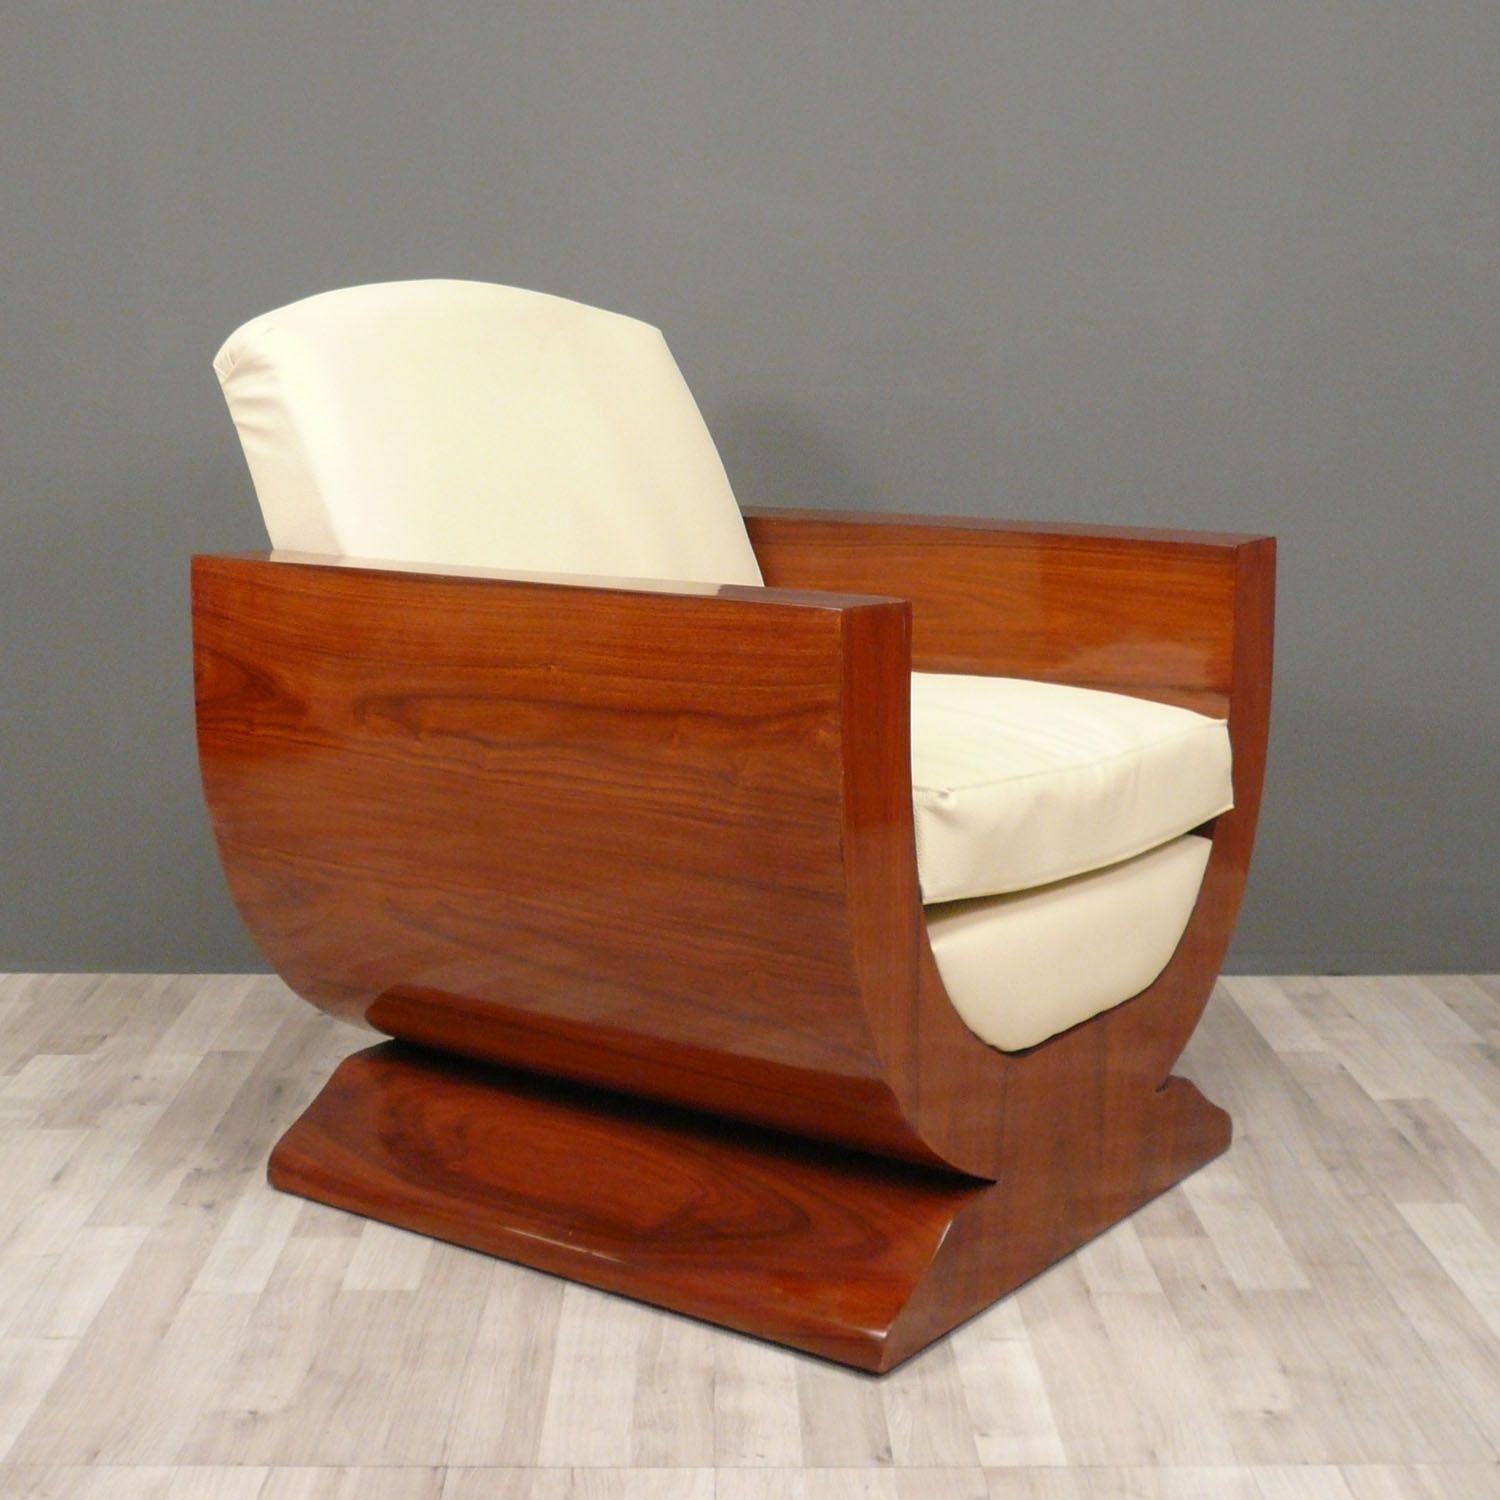 Art Deco Originated In France As Early As 1900 When A Group Of Pertaining To Art Deco Sofa And Chairs (View 7 of 15)